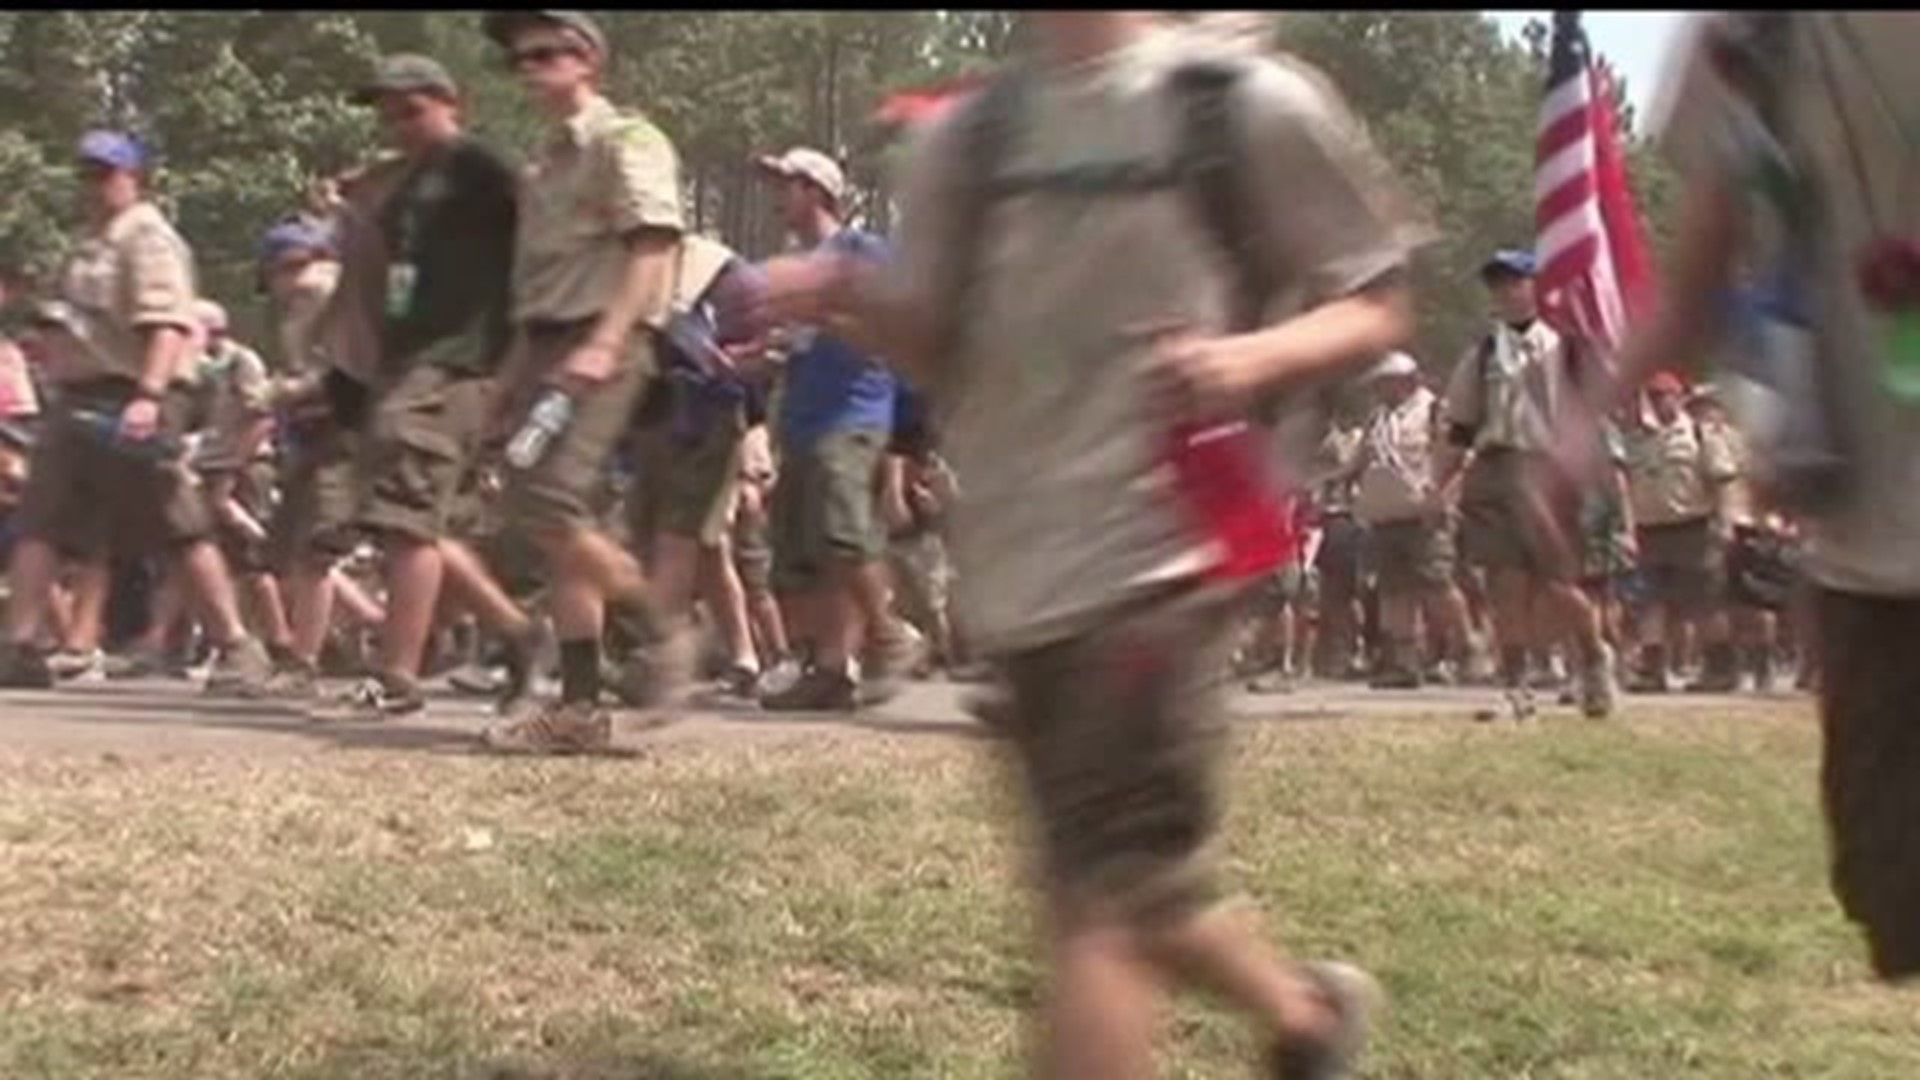 Local reaction to proposed lift of gay Boy Scout leaders ban